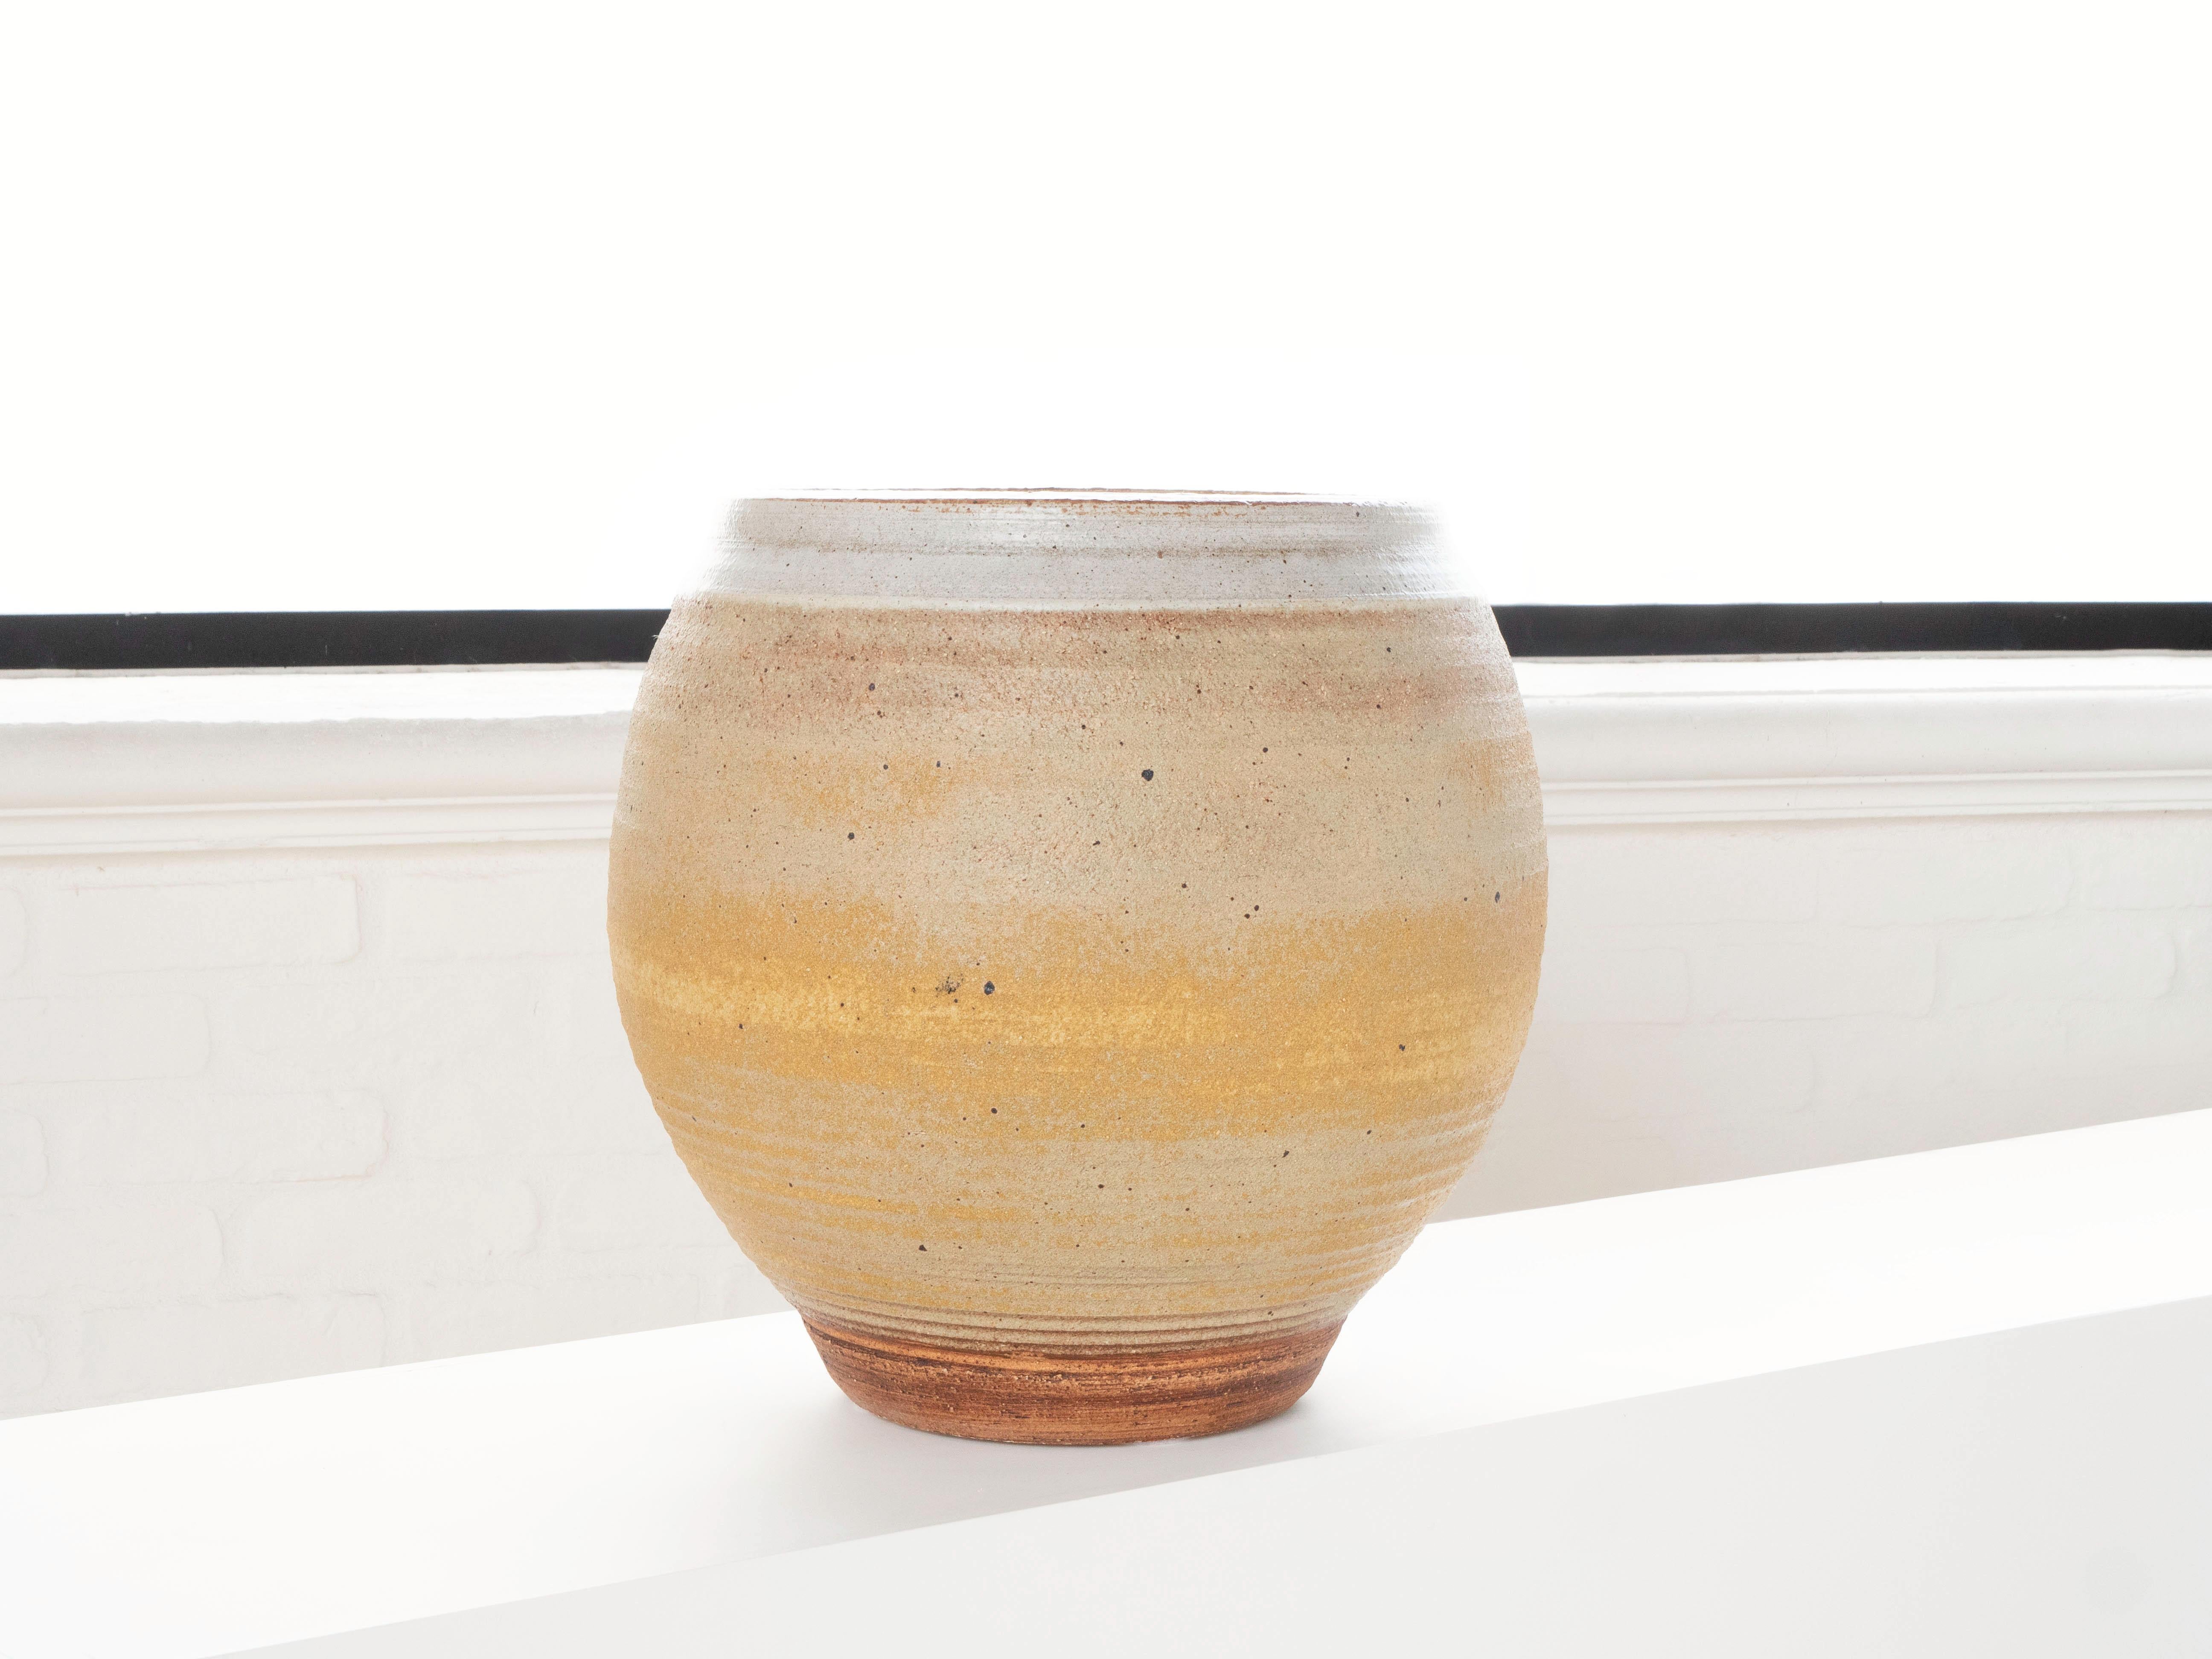 Ceramic Bob Kinzie Yellow Tan Glazed Hand Thrown Planter for Affiliated Craftsmen, 1960s For Sale